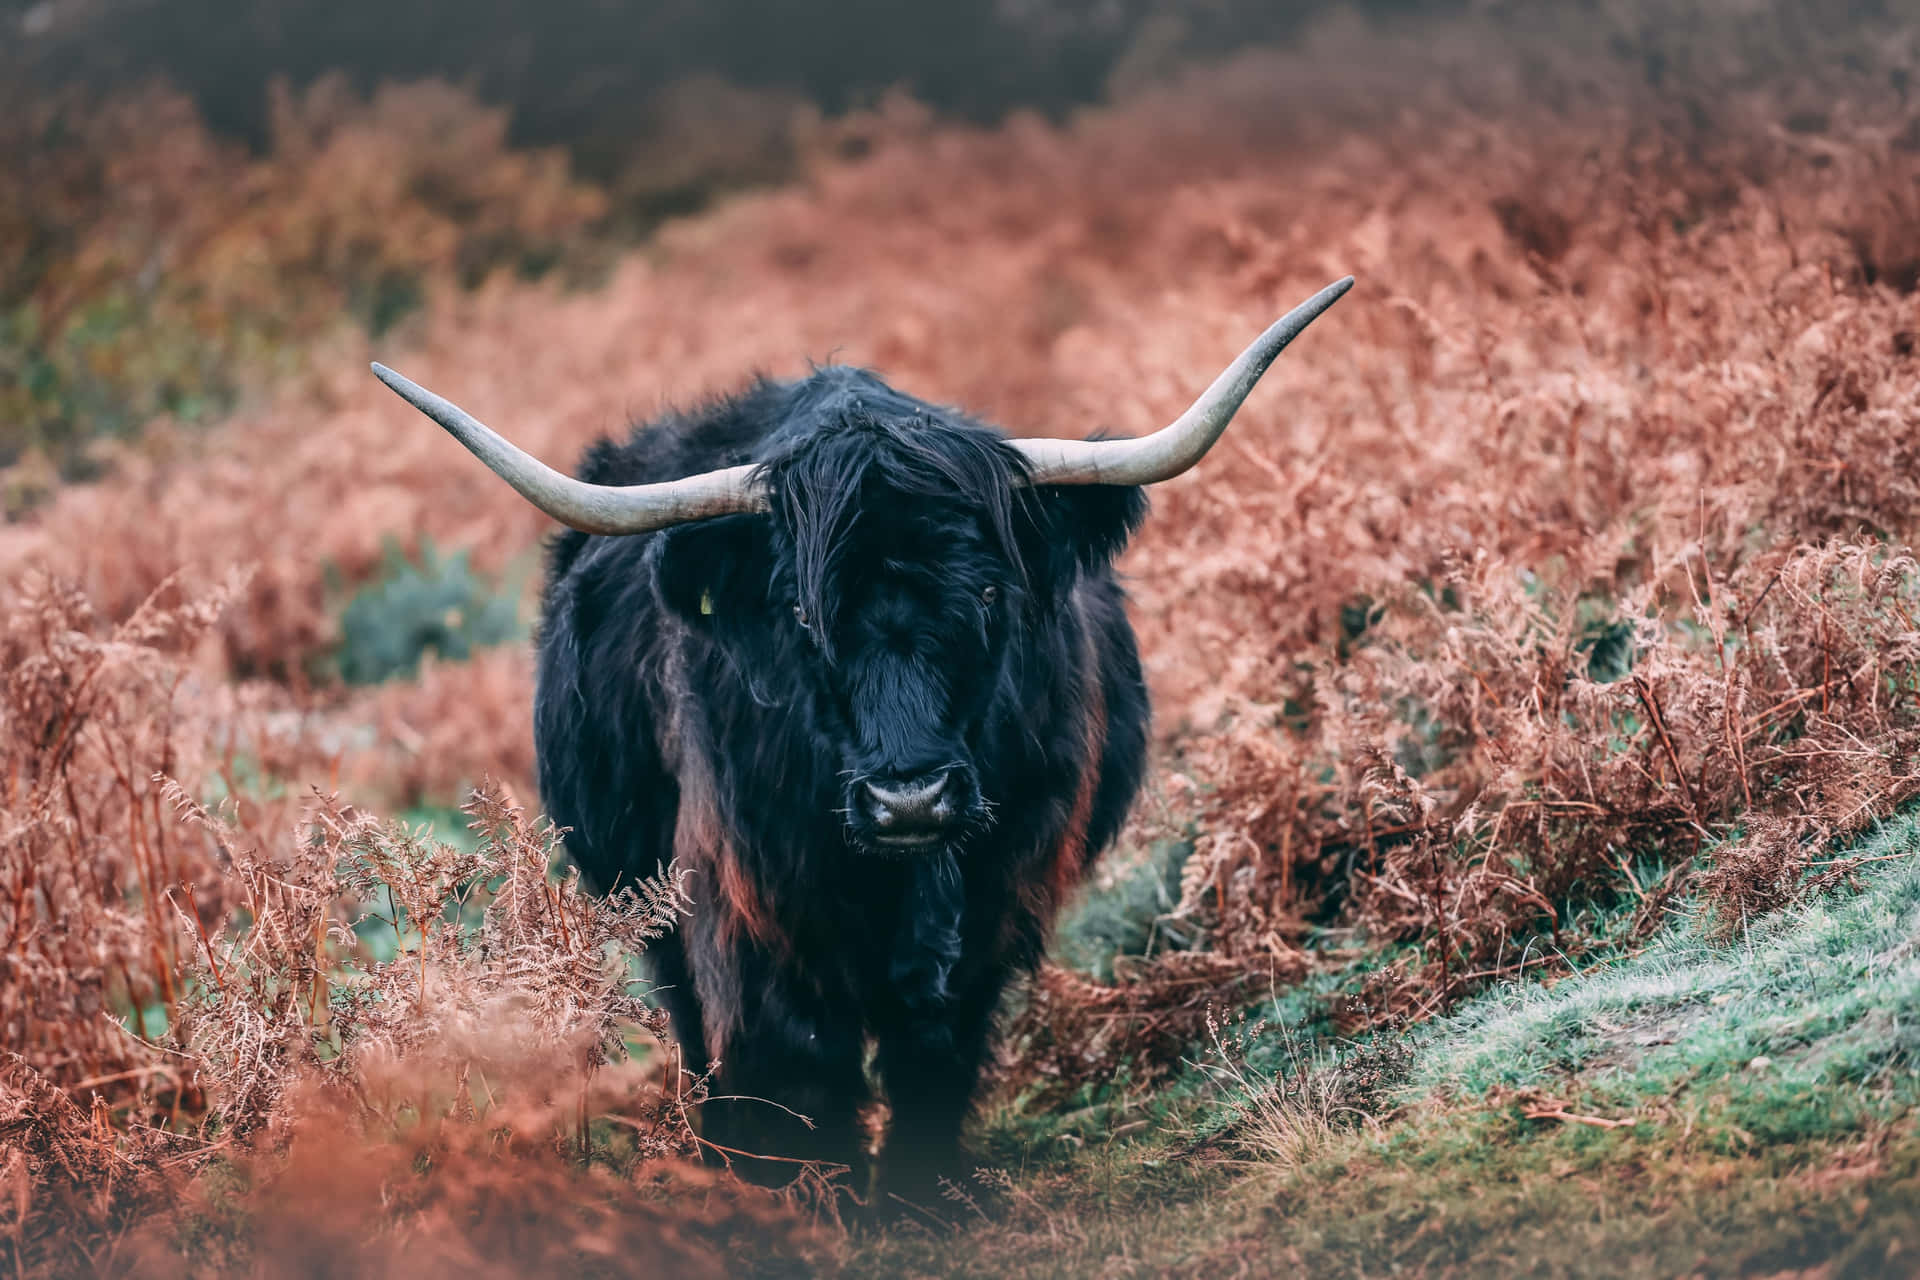 A yak grazing peacefully in the grasslands